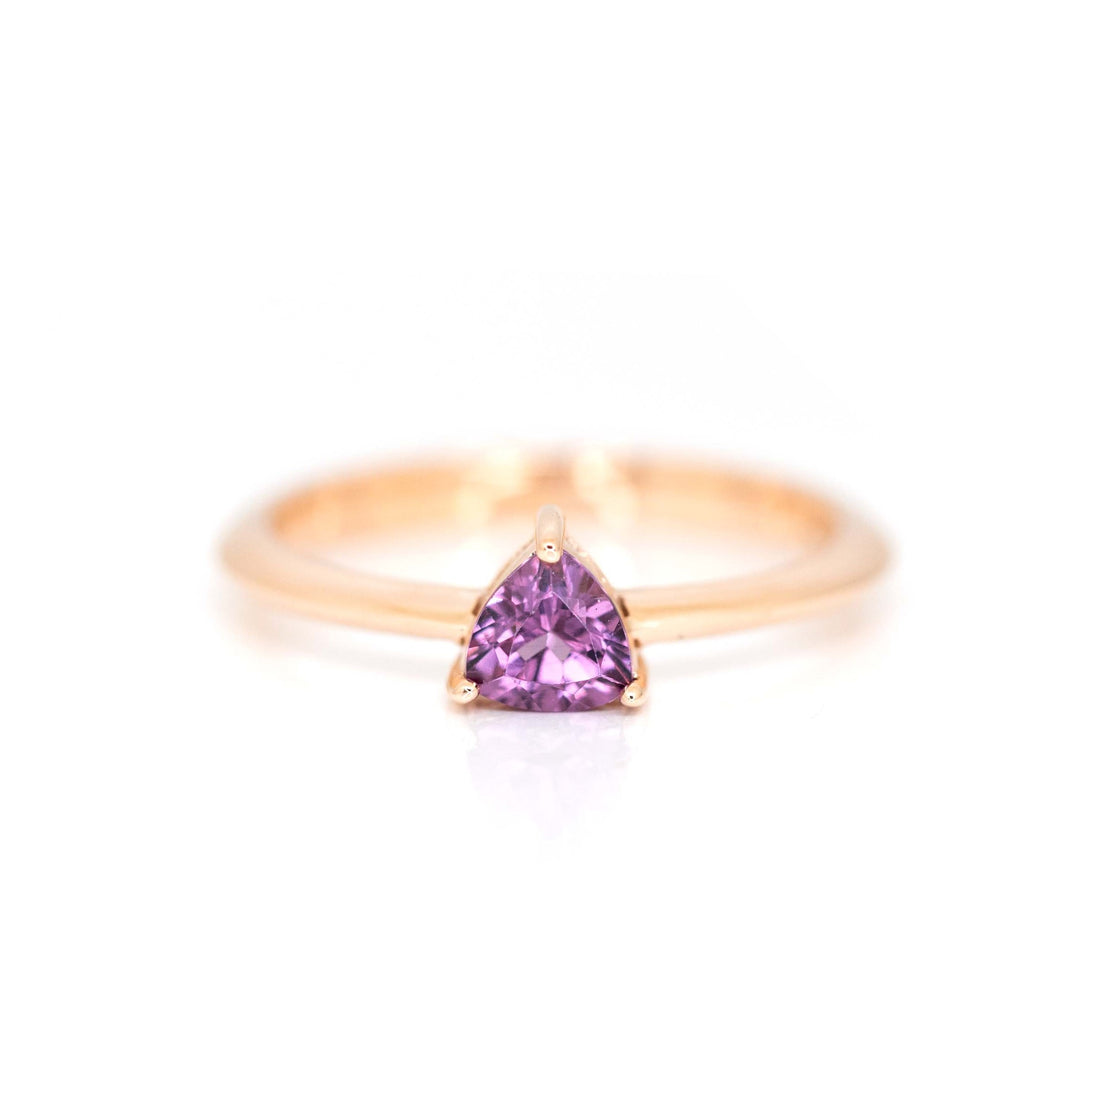 this bridal ring is made with a trillion shape purple rhodolite garnet by bena jewelry designer on a white back ground